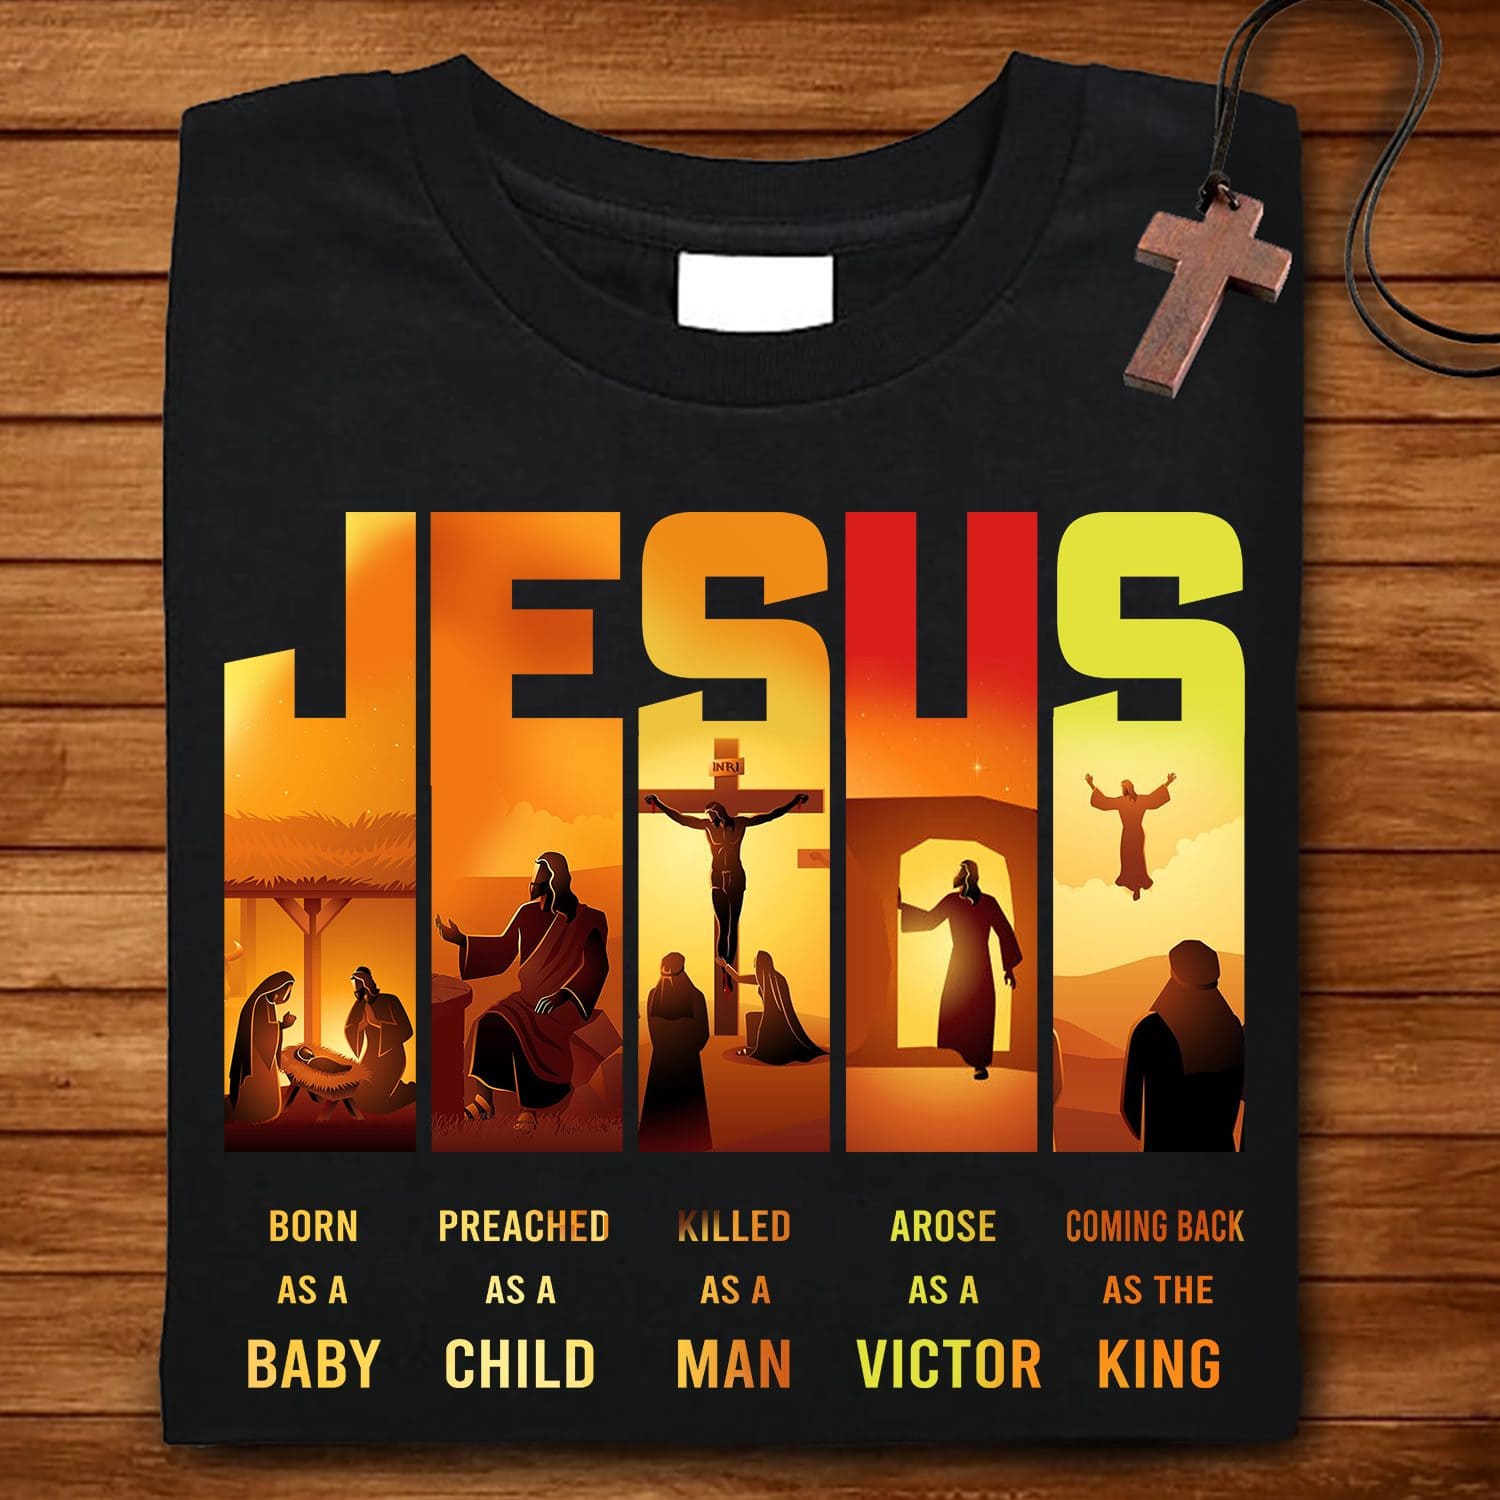 Jesus Christ - Jesus Born as a baby Preached as a child Killed as a man Arose as a victor Coming back as the king